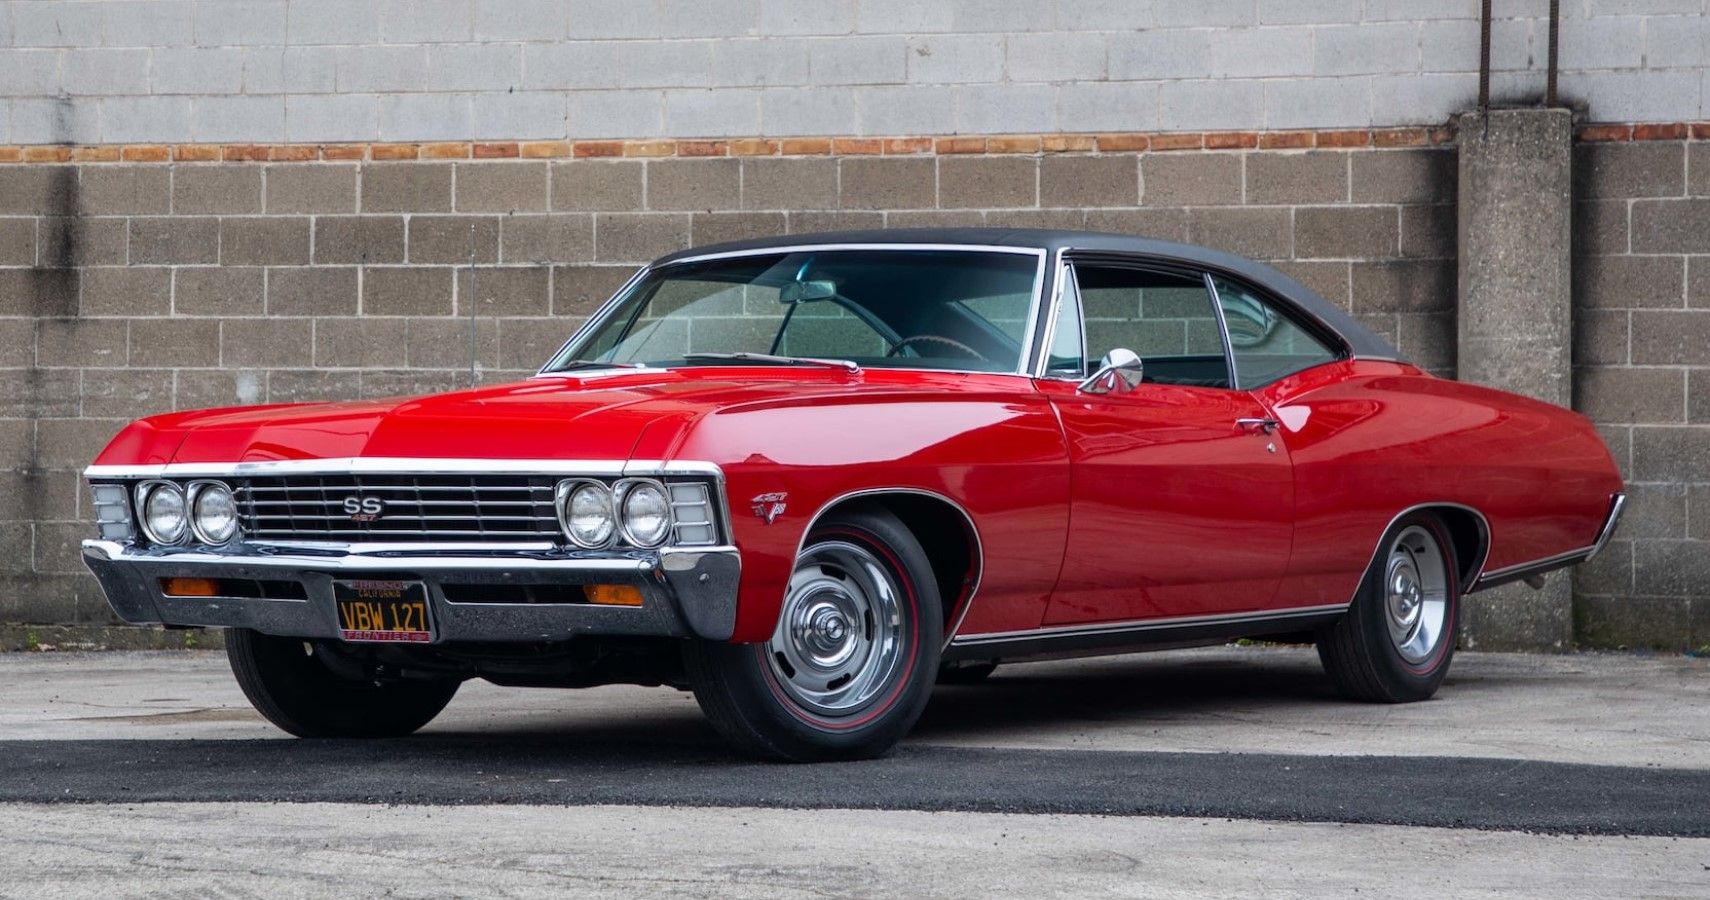 1967 Chevrolet Impala in red front third quarter muscle car wallpaper view